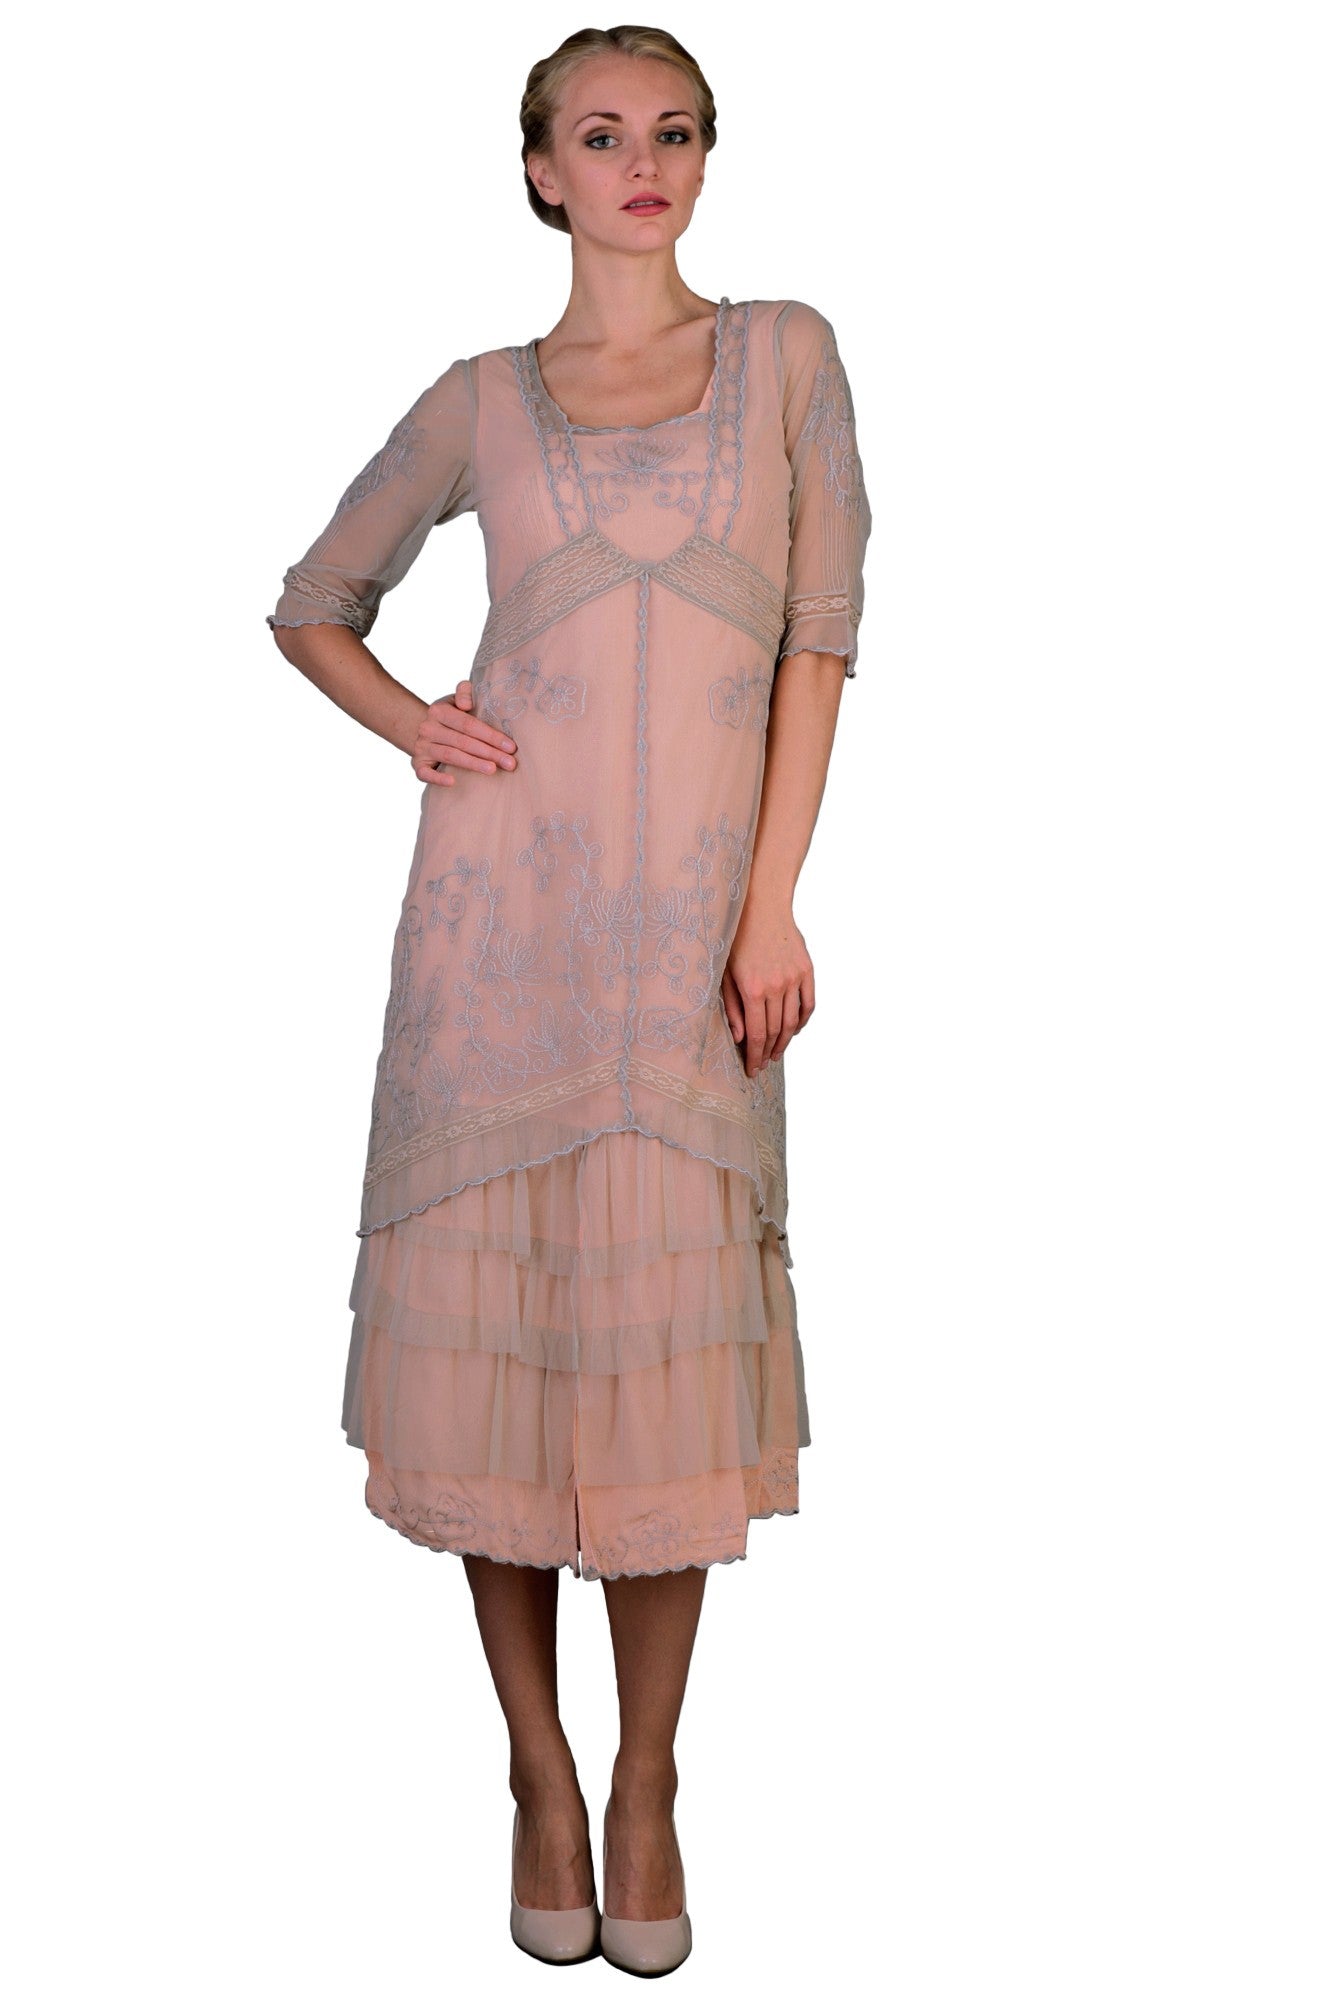 Titanic Tea Party Dress in Antique Pink by Nataya - SOLD OUT